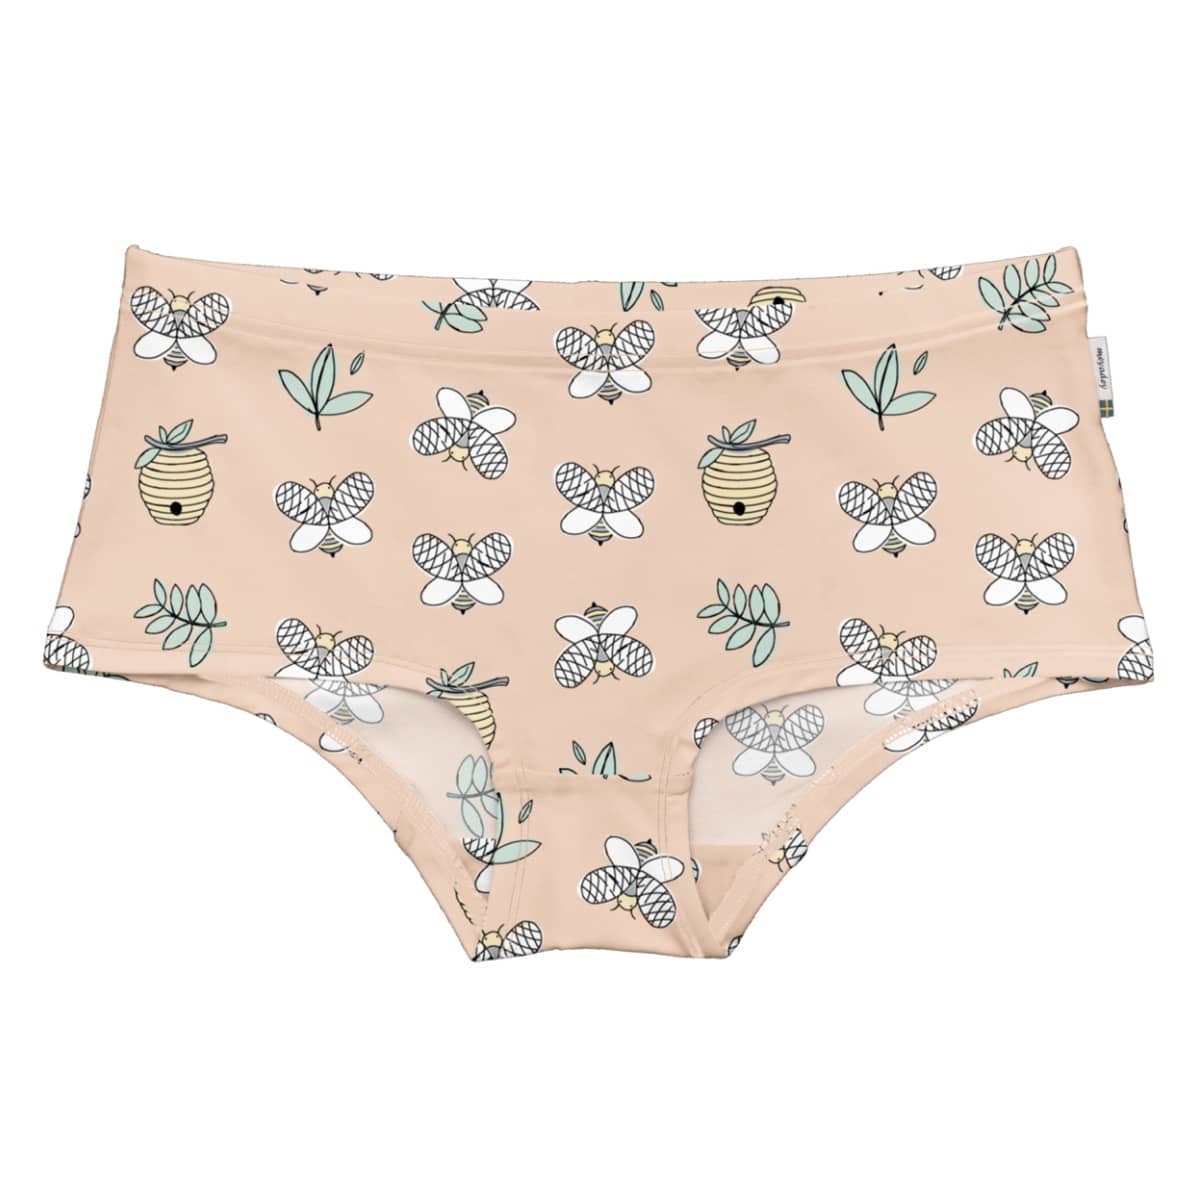 Hipster Knickers, Cotton Hipsters